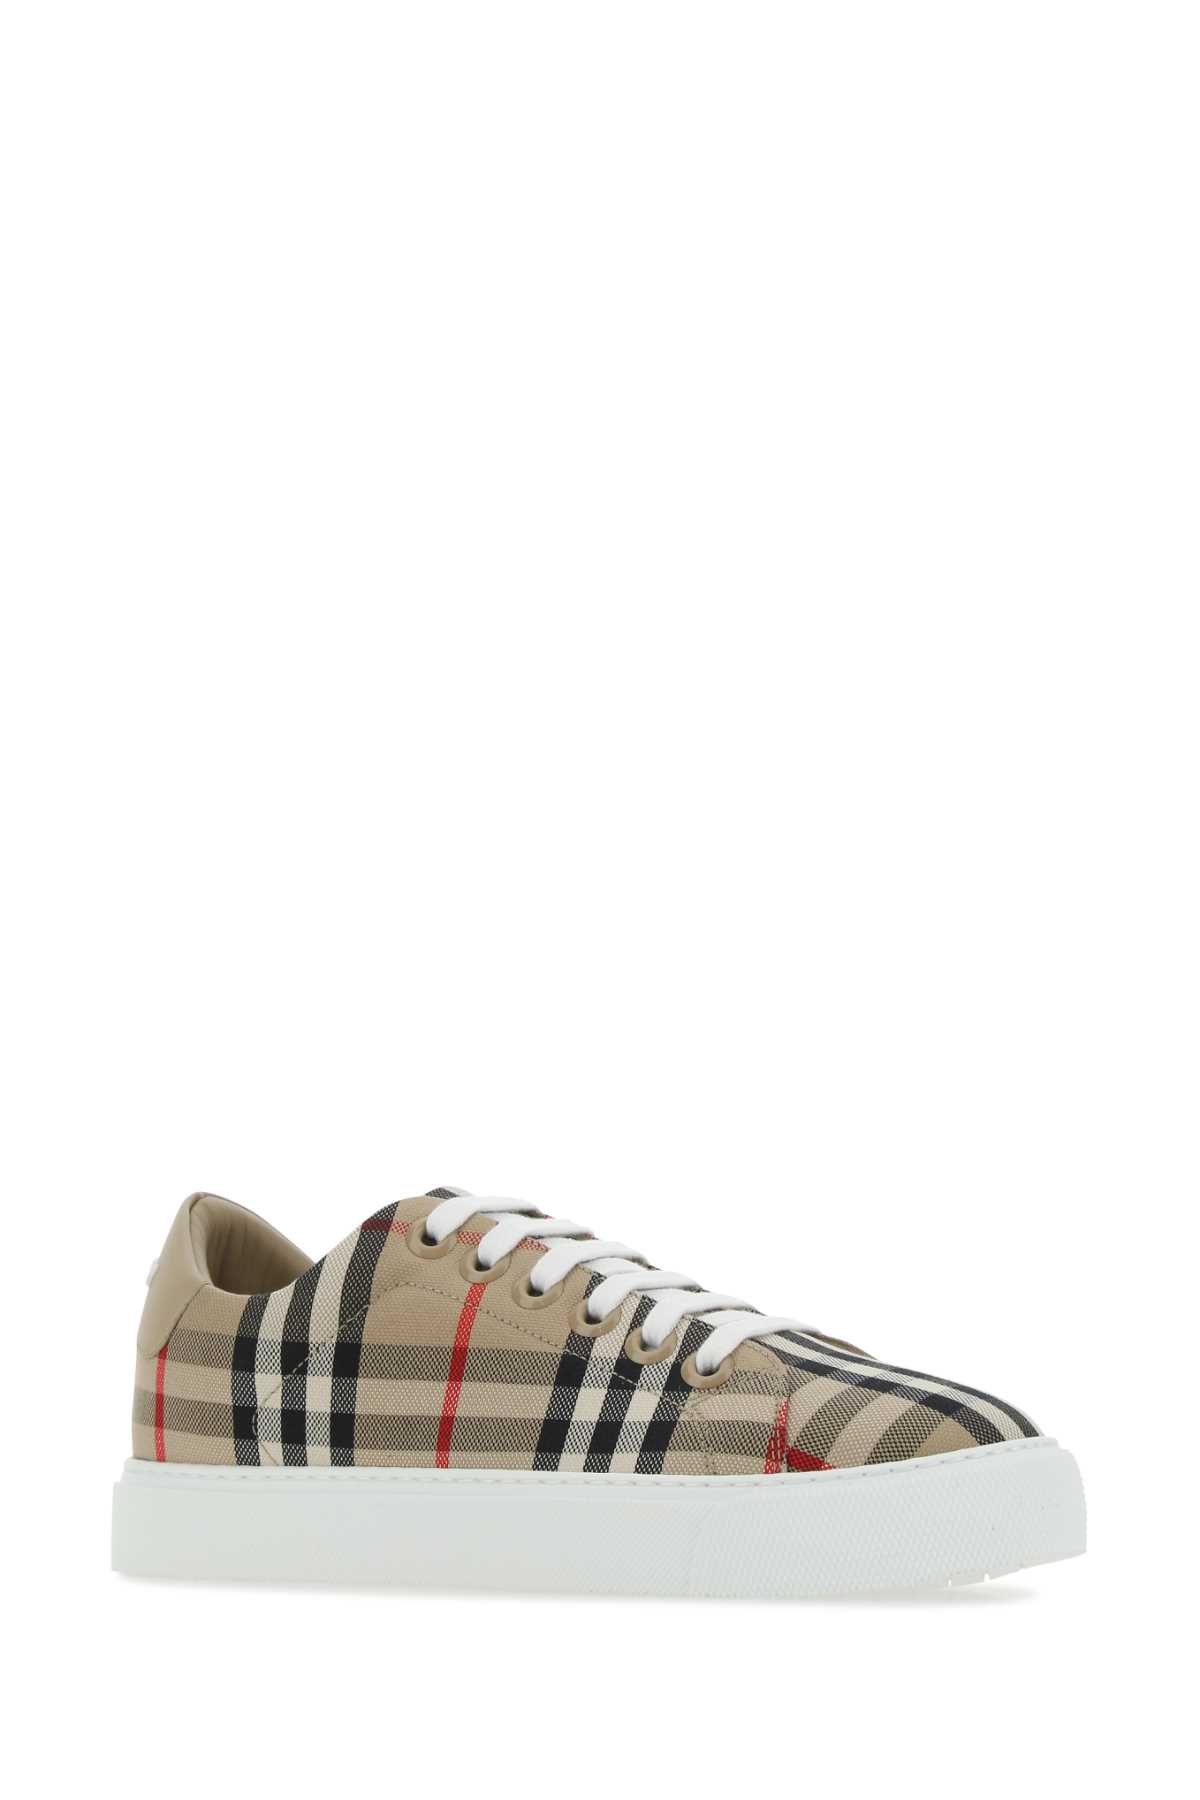 Shop Burberry Embroidered Canvas Sneakers In A7026